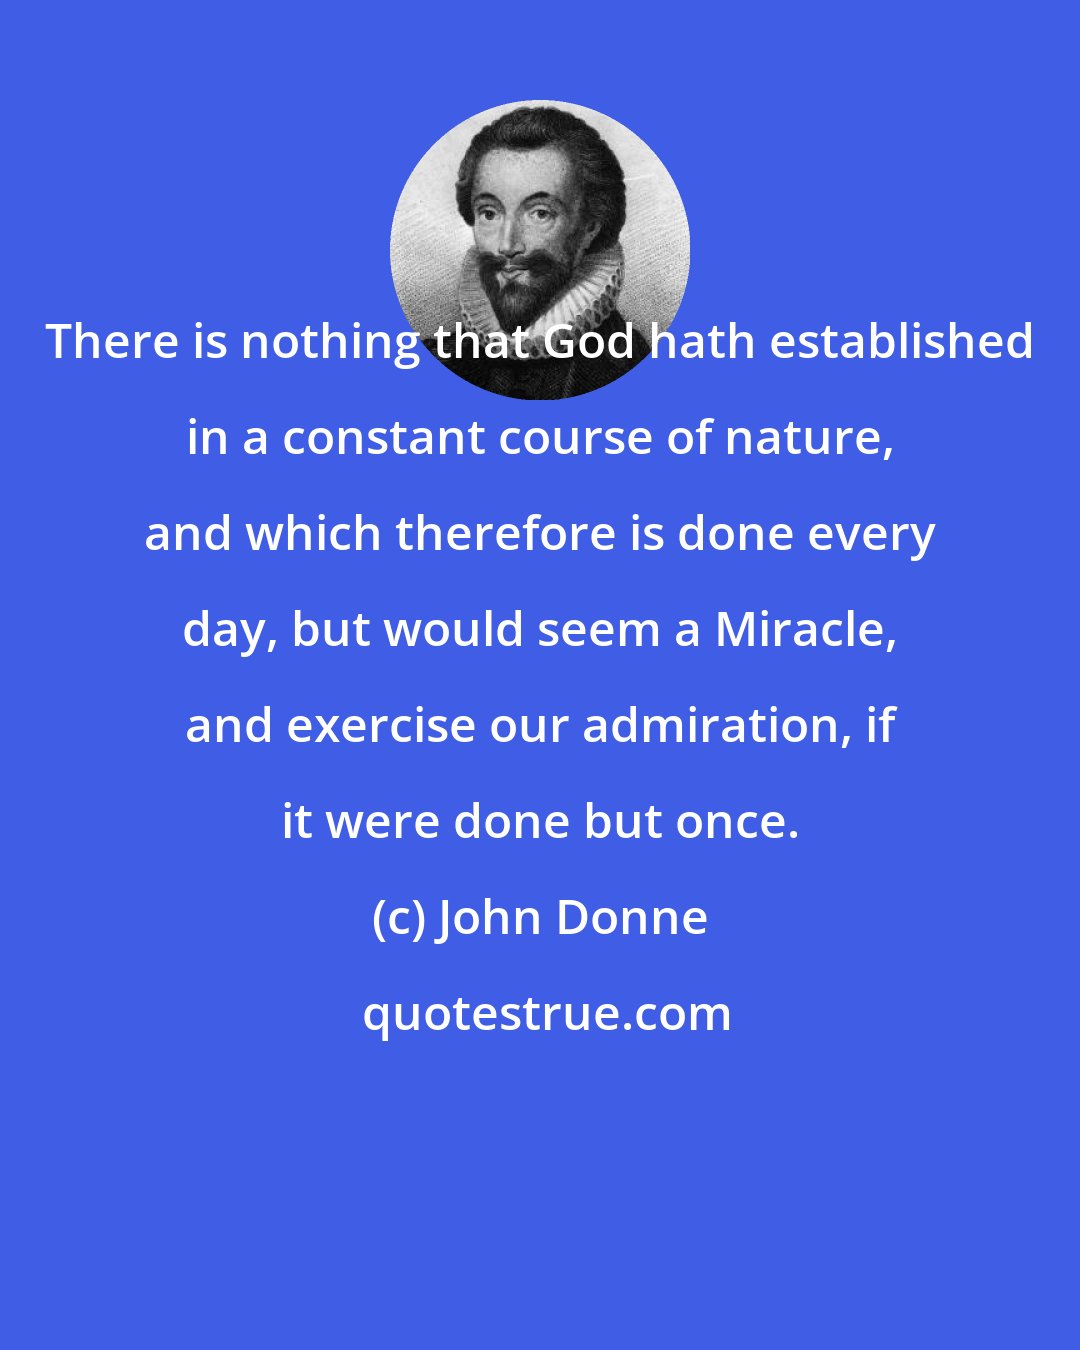 John Donne: There is nothing that God hath established in a constant course of nature, and which therefore is done every day, but would seem a Miracle, and exercise our admiration, if it were done but once.